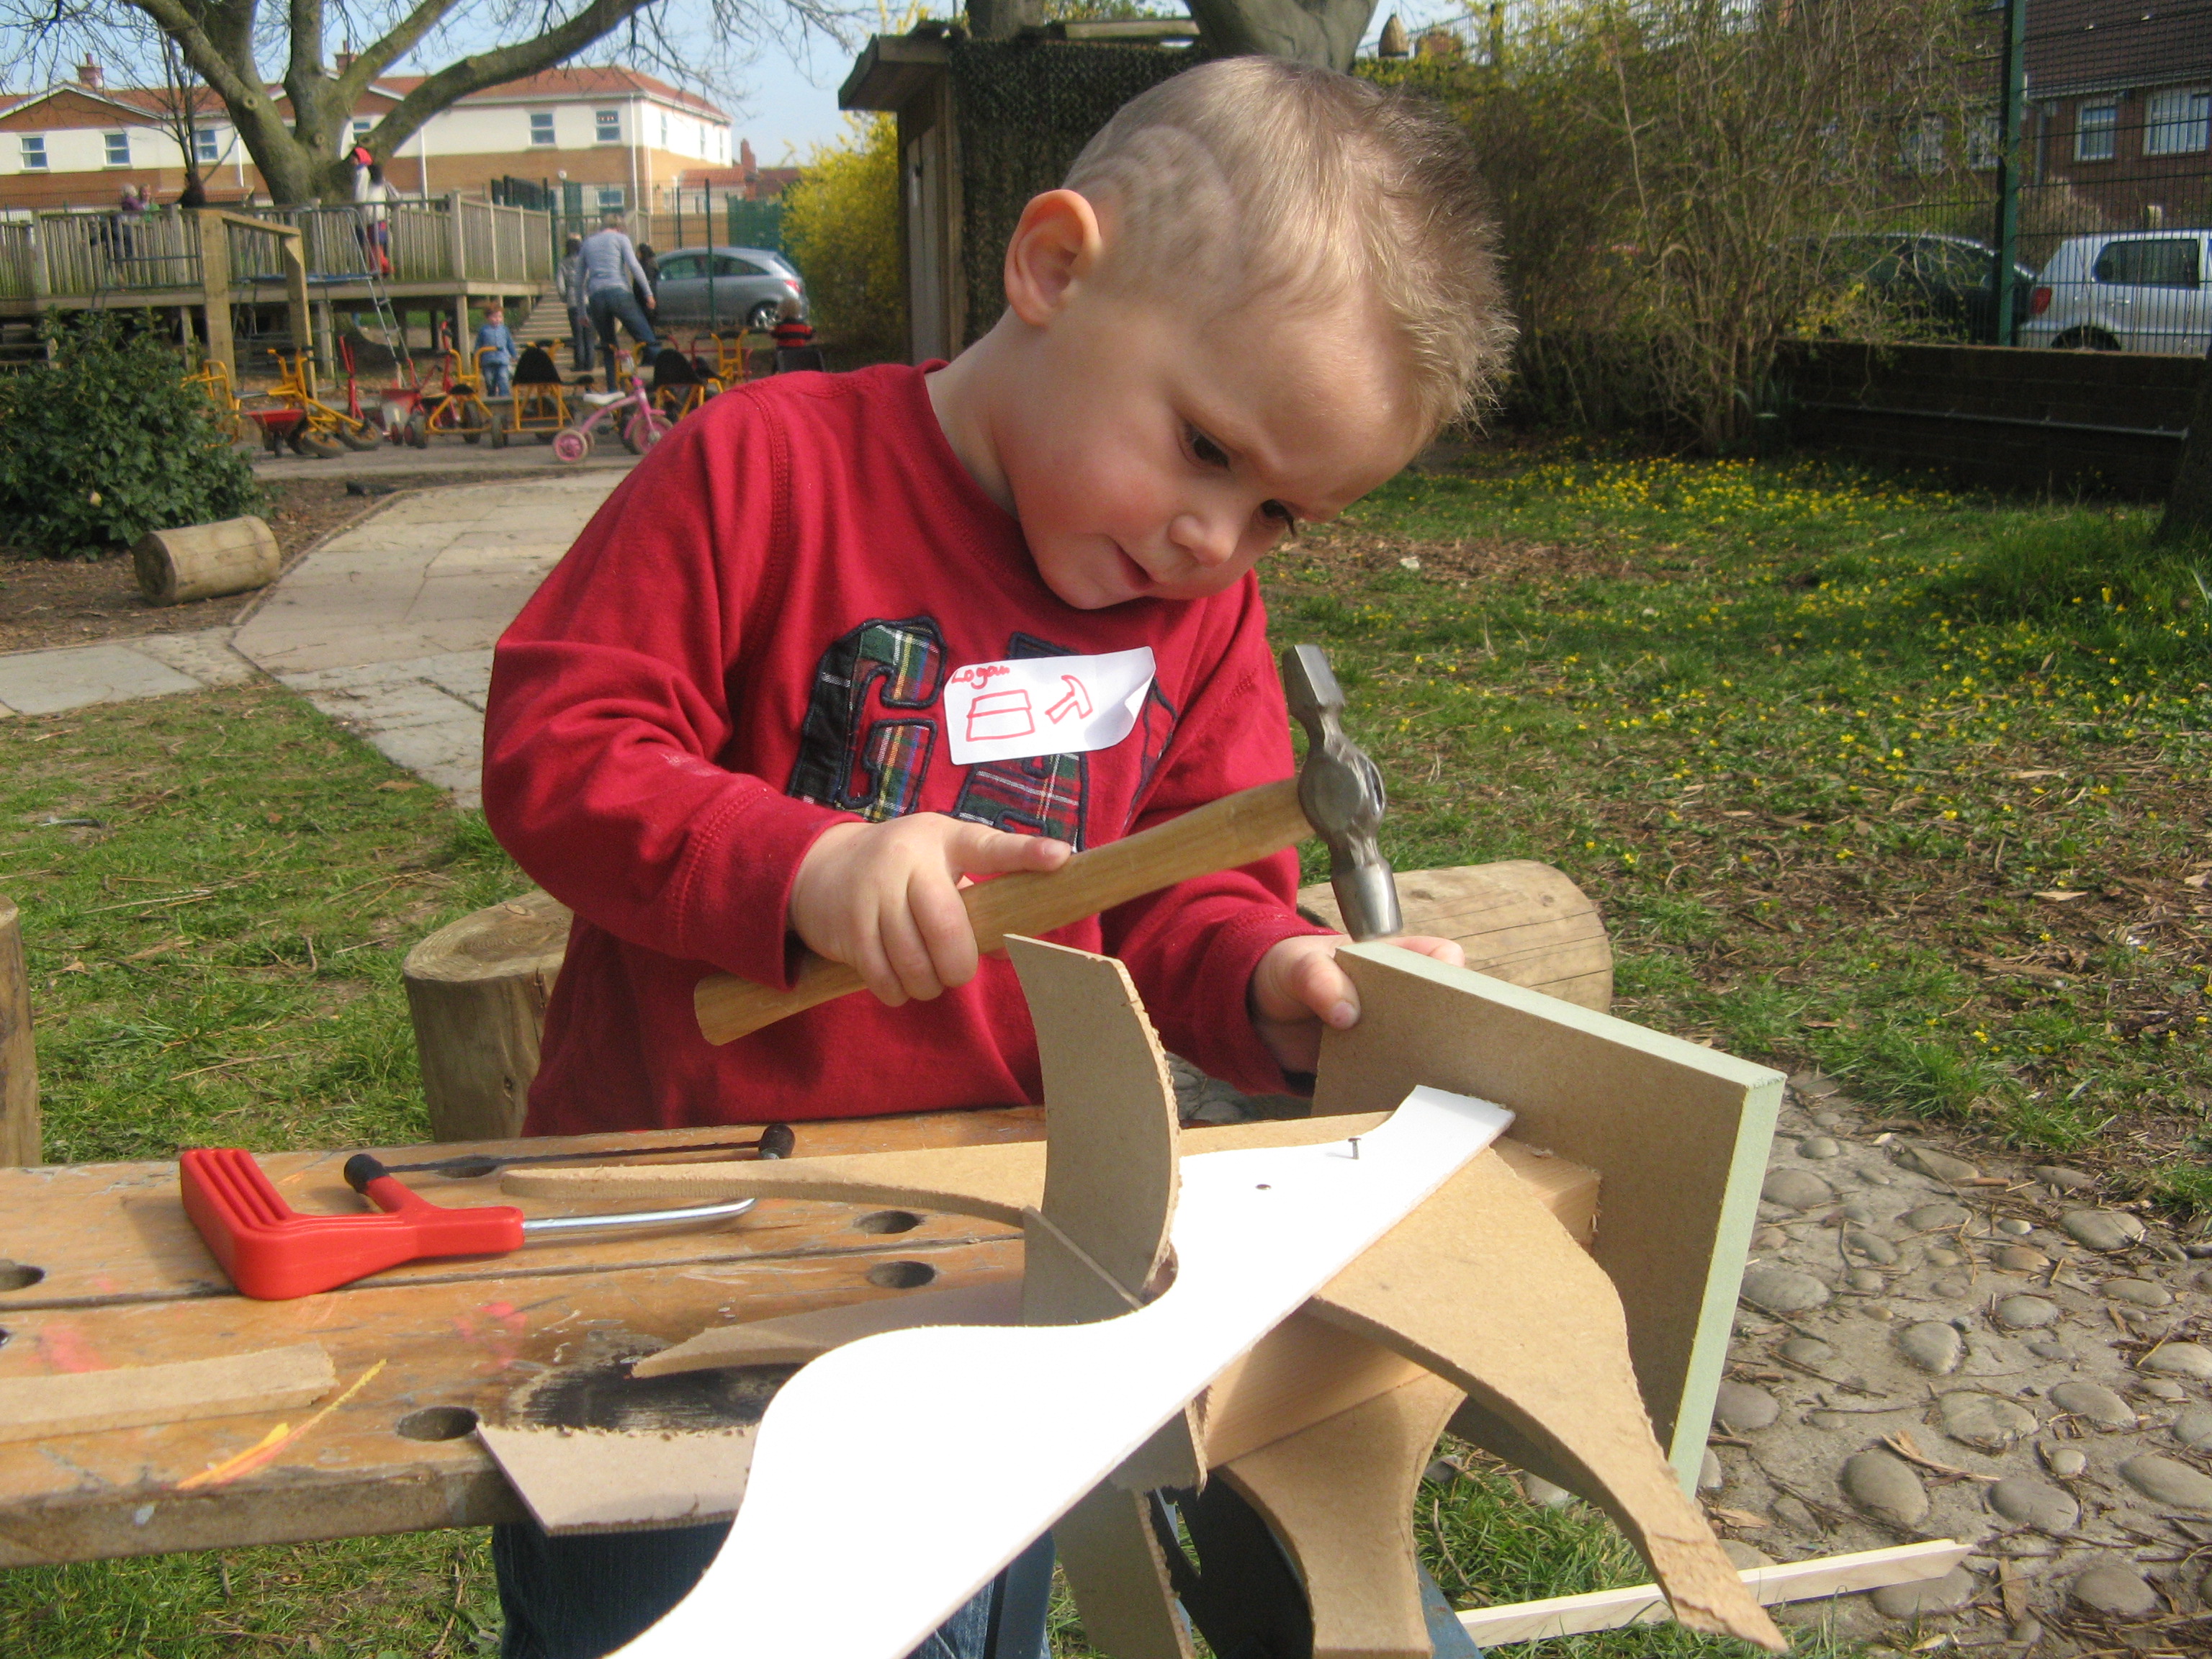 Woodworking childrens wood projects PDF Free Download